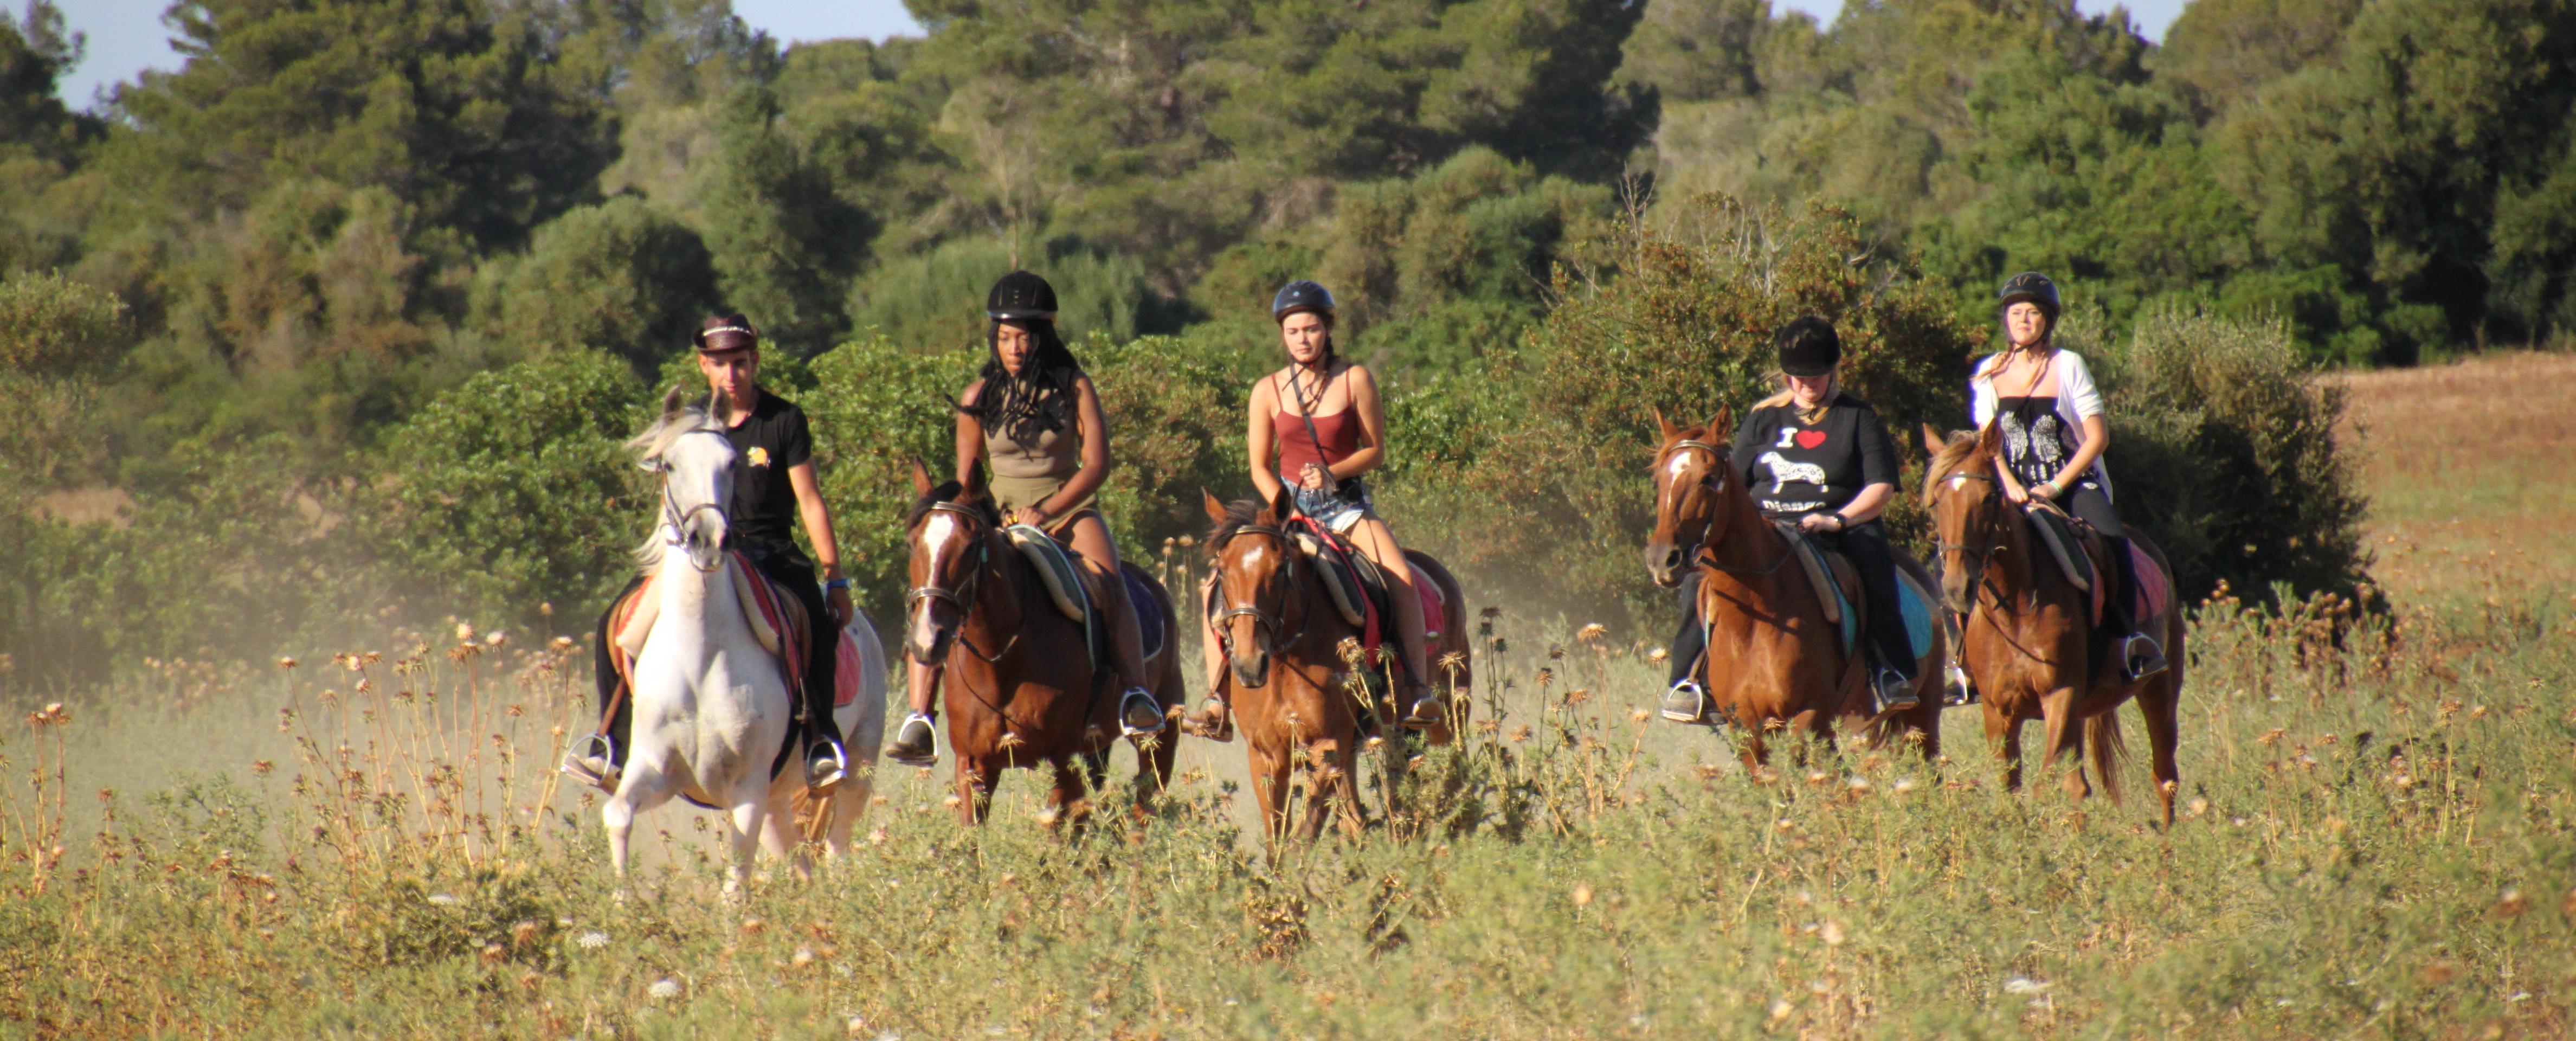 Horse Riding in Mallorca & BBQ Dinner – Hotel pick-up/drop-off